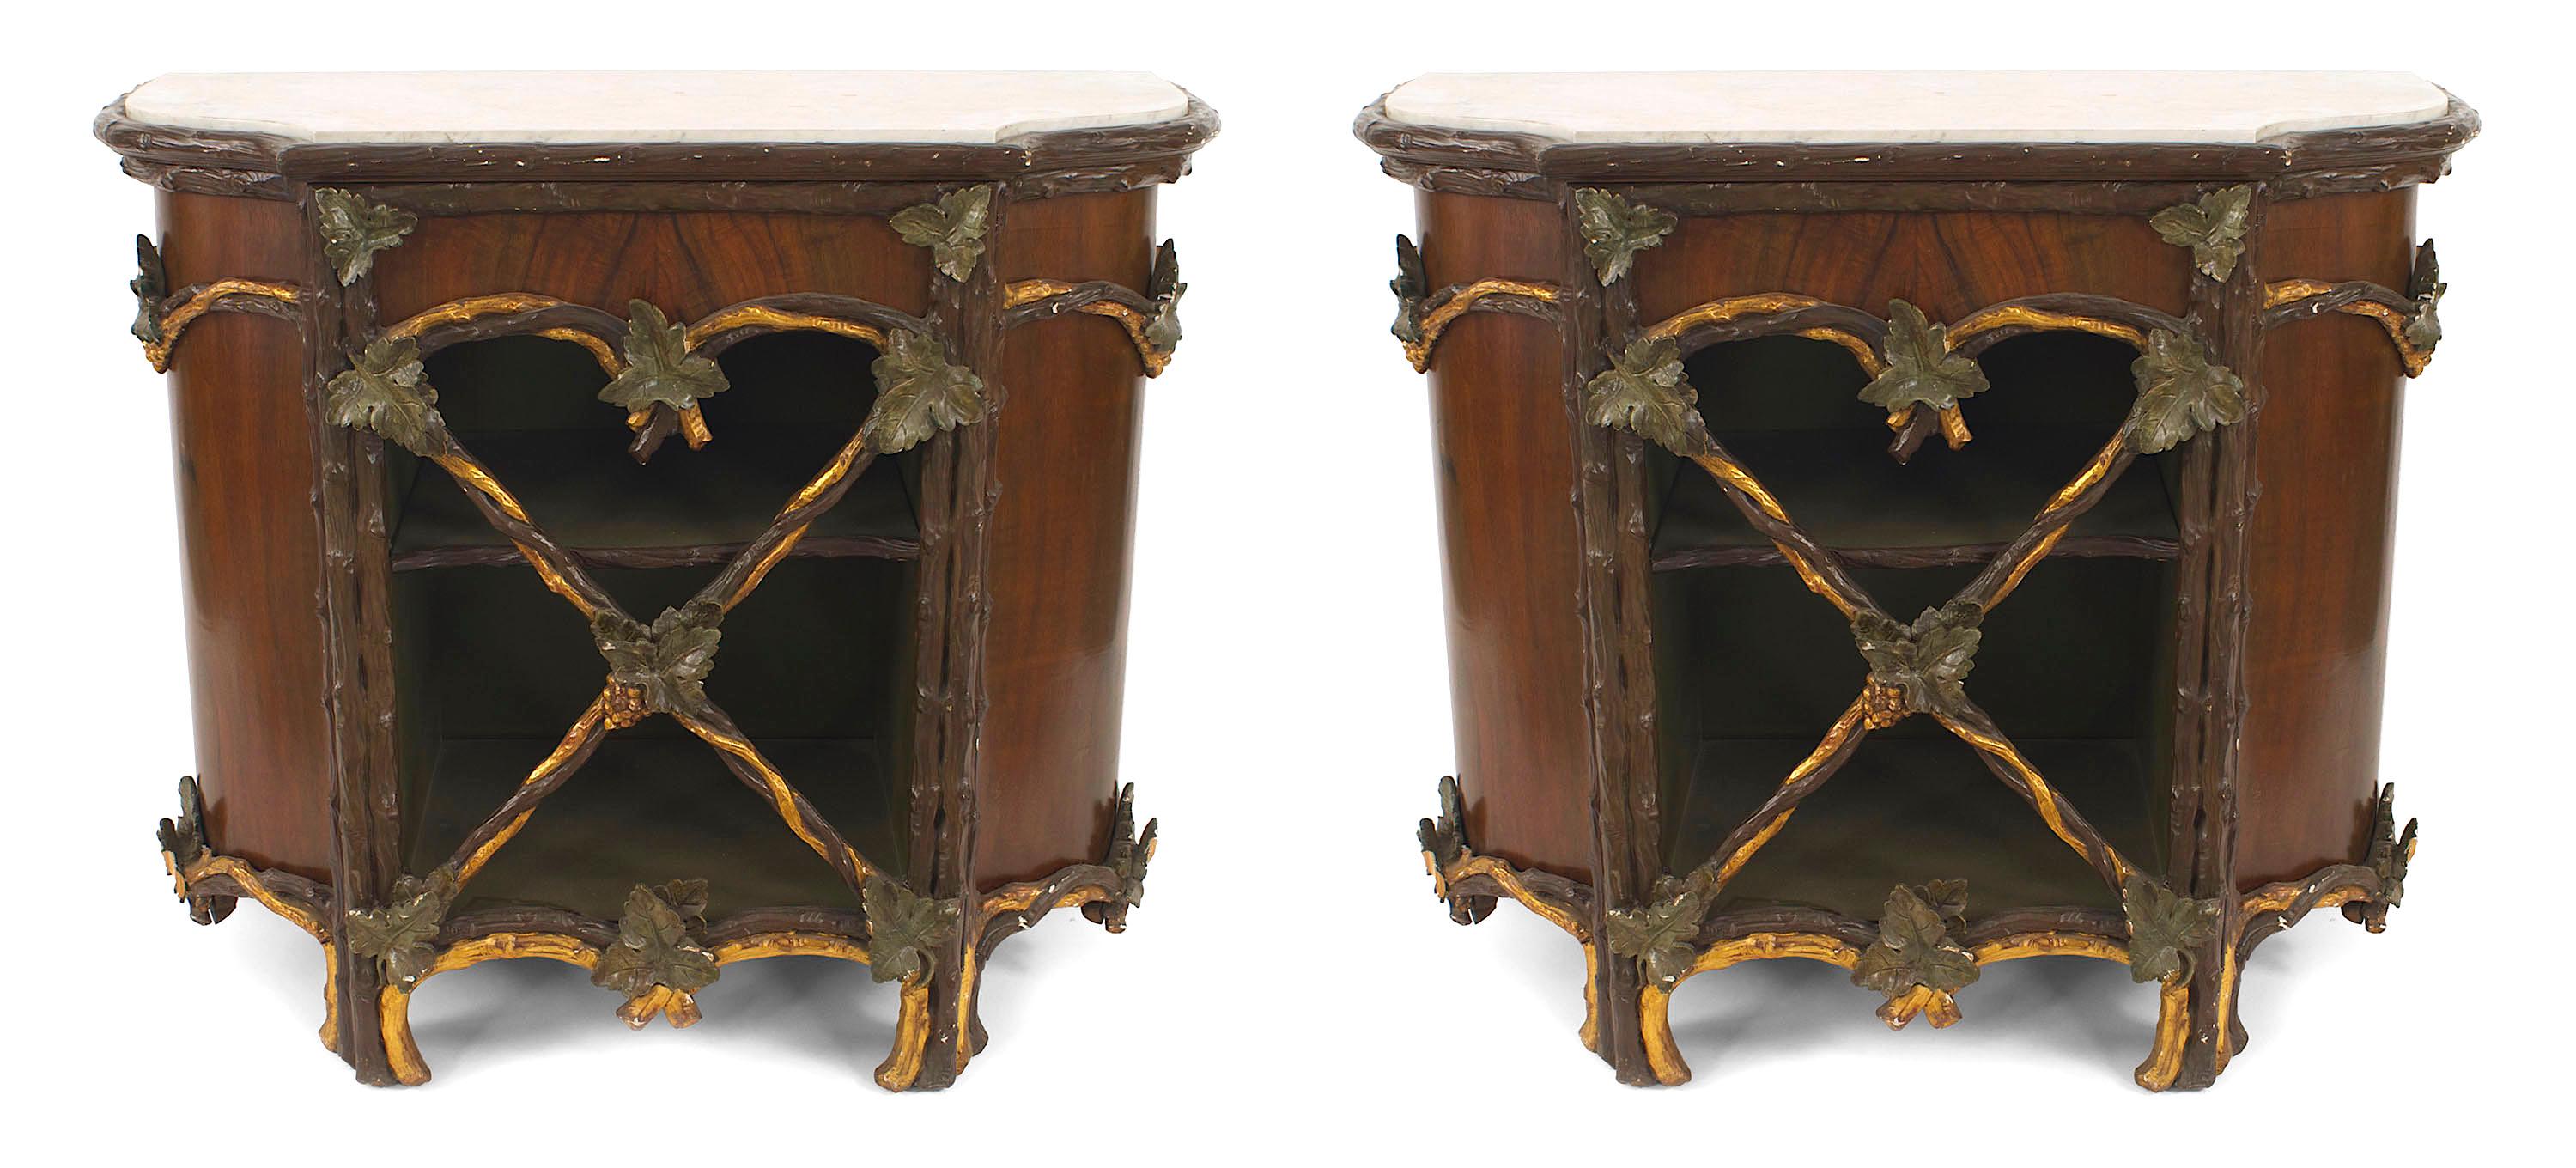 Pair of Rustic Continental (19th Century) painted and gilt trimmed commodes with carved leaf design on front door with shaped white marble top. (Related item: 056123) (PRICED AS Pair).
